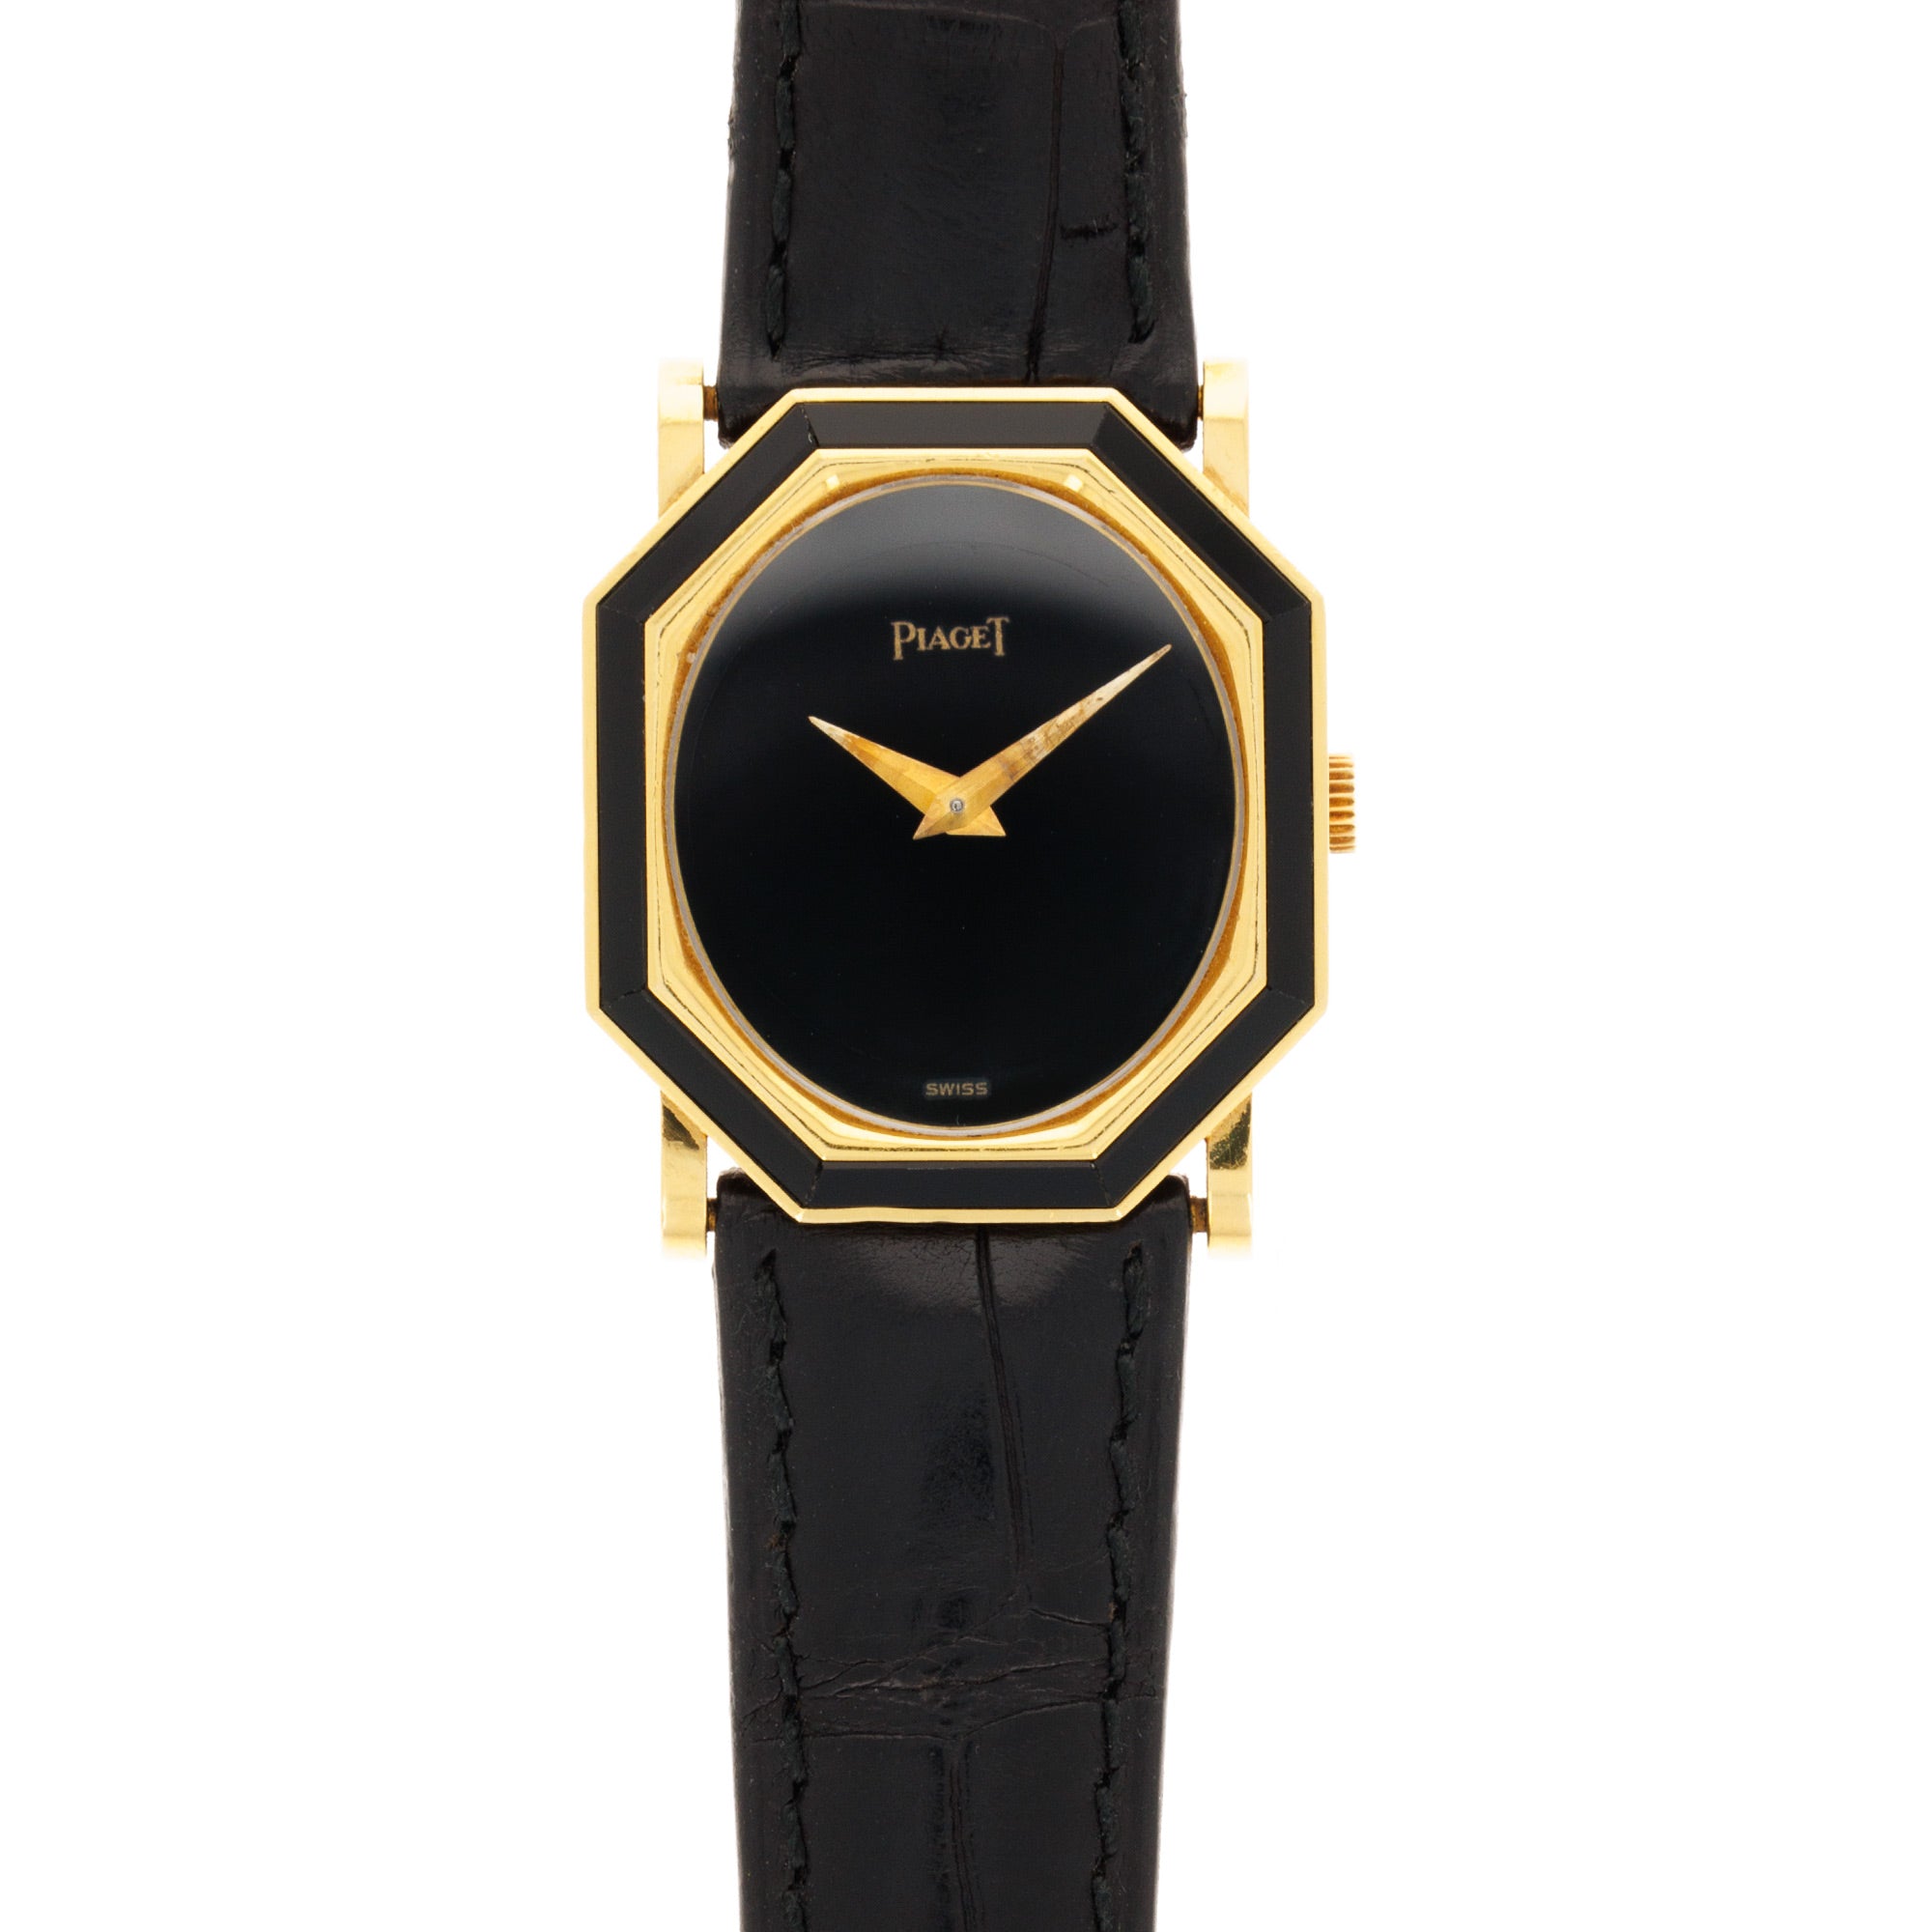 Piaget - Piaget Yellow Gold and Onyx Watch Ref. 9341 - The Keystone Watches